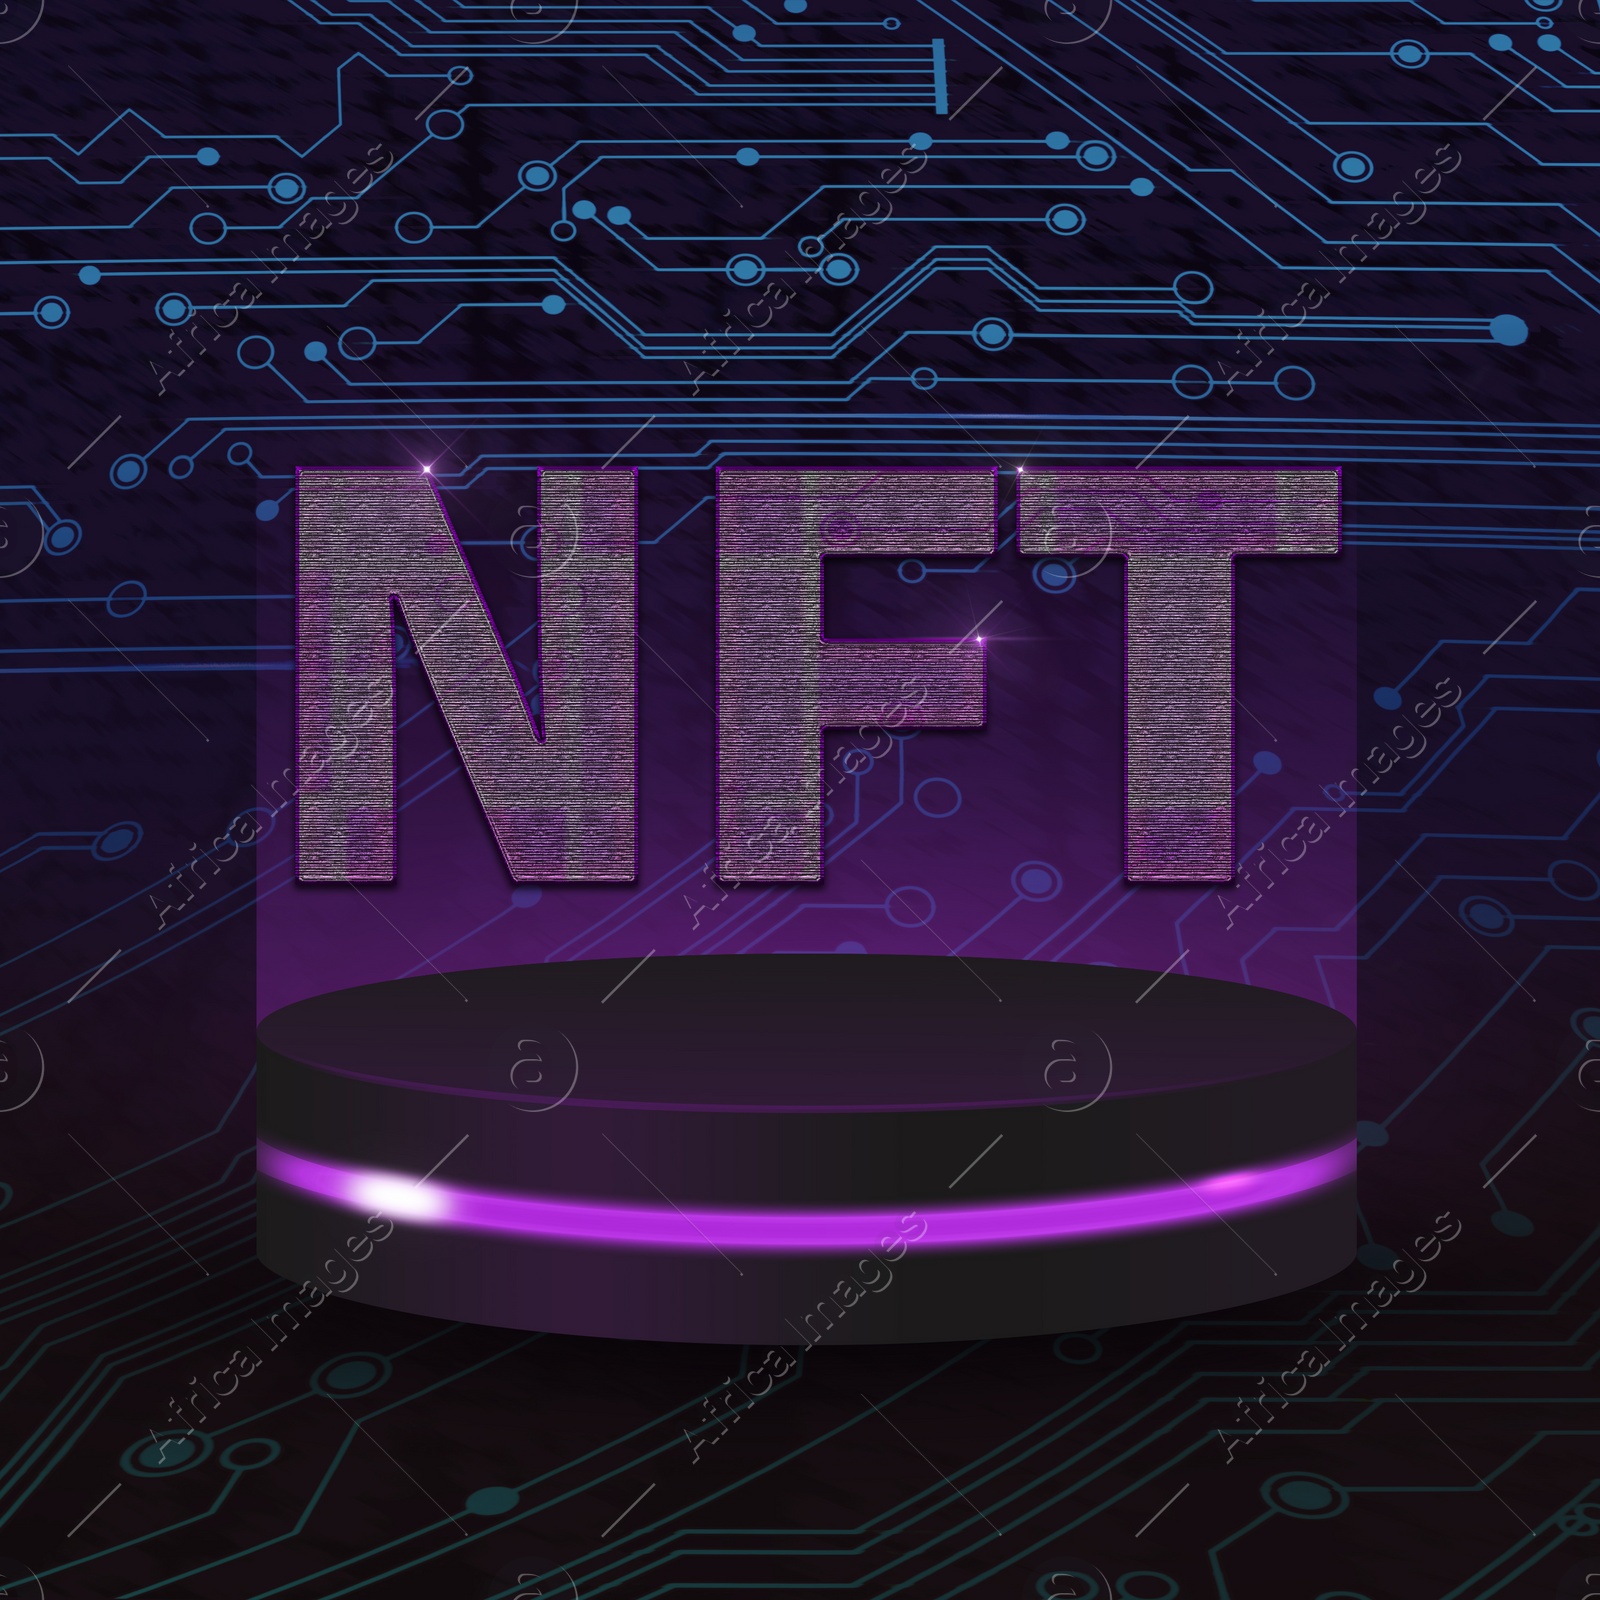 Image of Abbreviation NFT (non-fungible token) on chip and circuit board pattern illustration